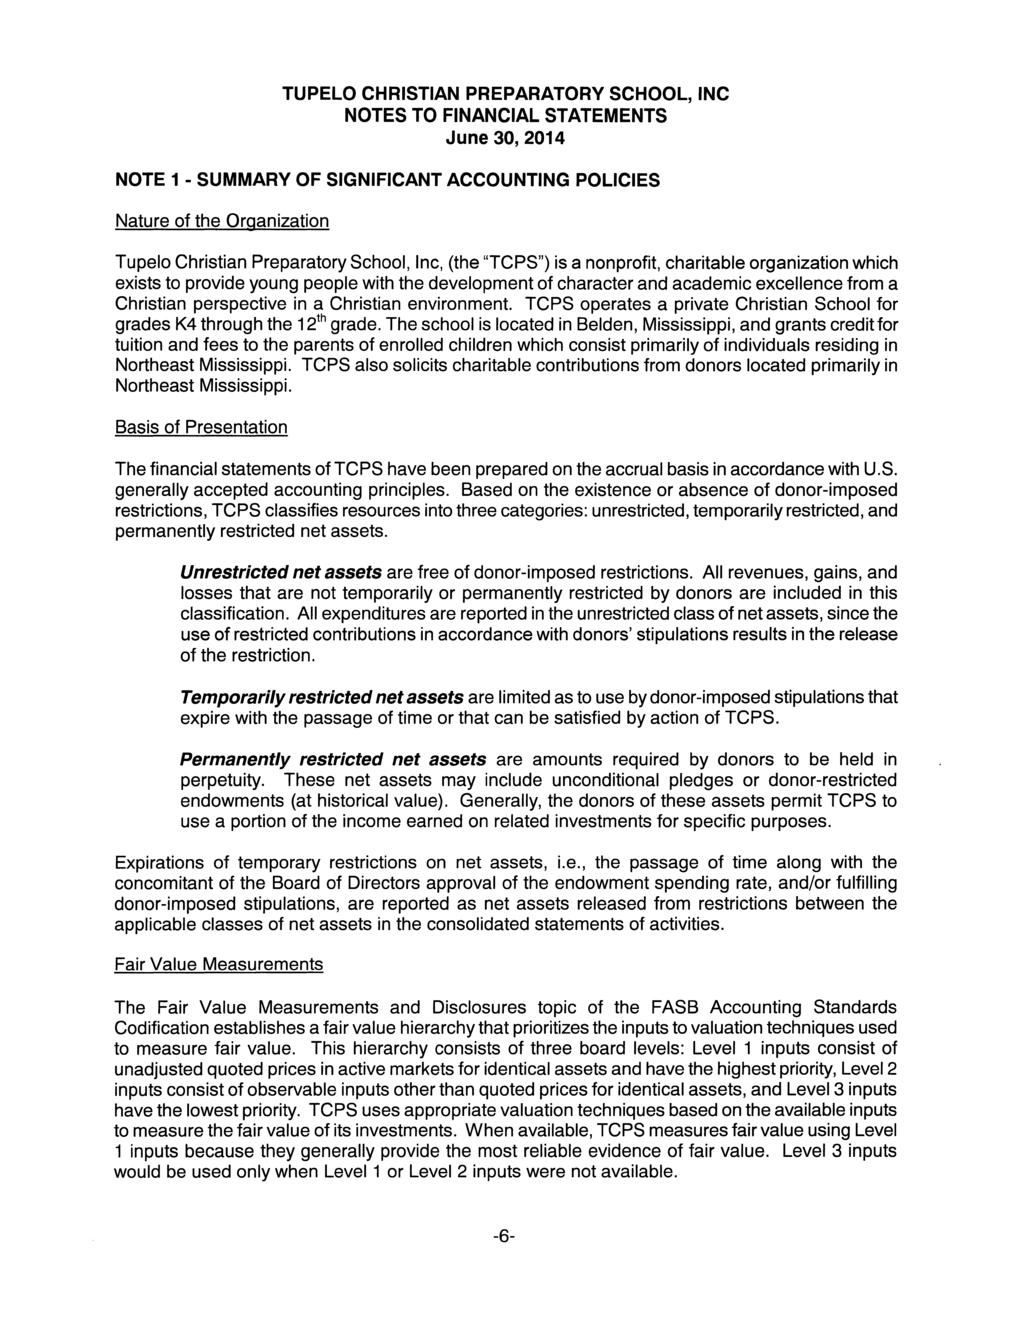 TUPELO CHRISTIAN PREPARATORY SCHOOL, INC NOTES TO FINANCIAL STATEMENTS June 30, 2014 NOTE 1 - SUMMARY OF SIGNIFICANT ACCOUNTING POLICIES Nature of the Organization Tupelo Christian Preparatory